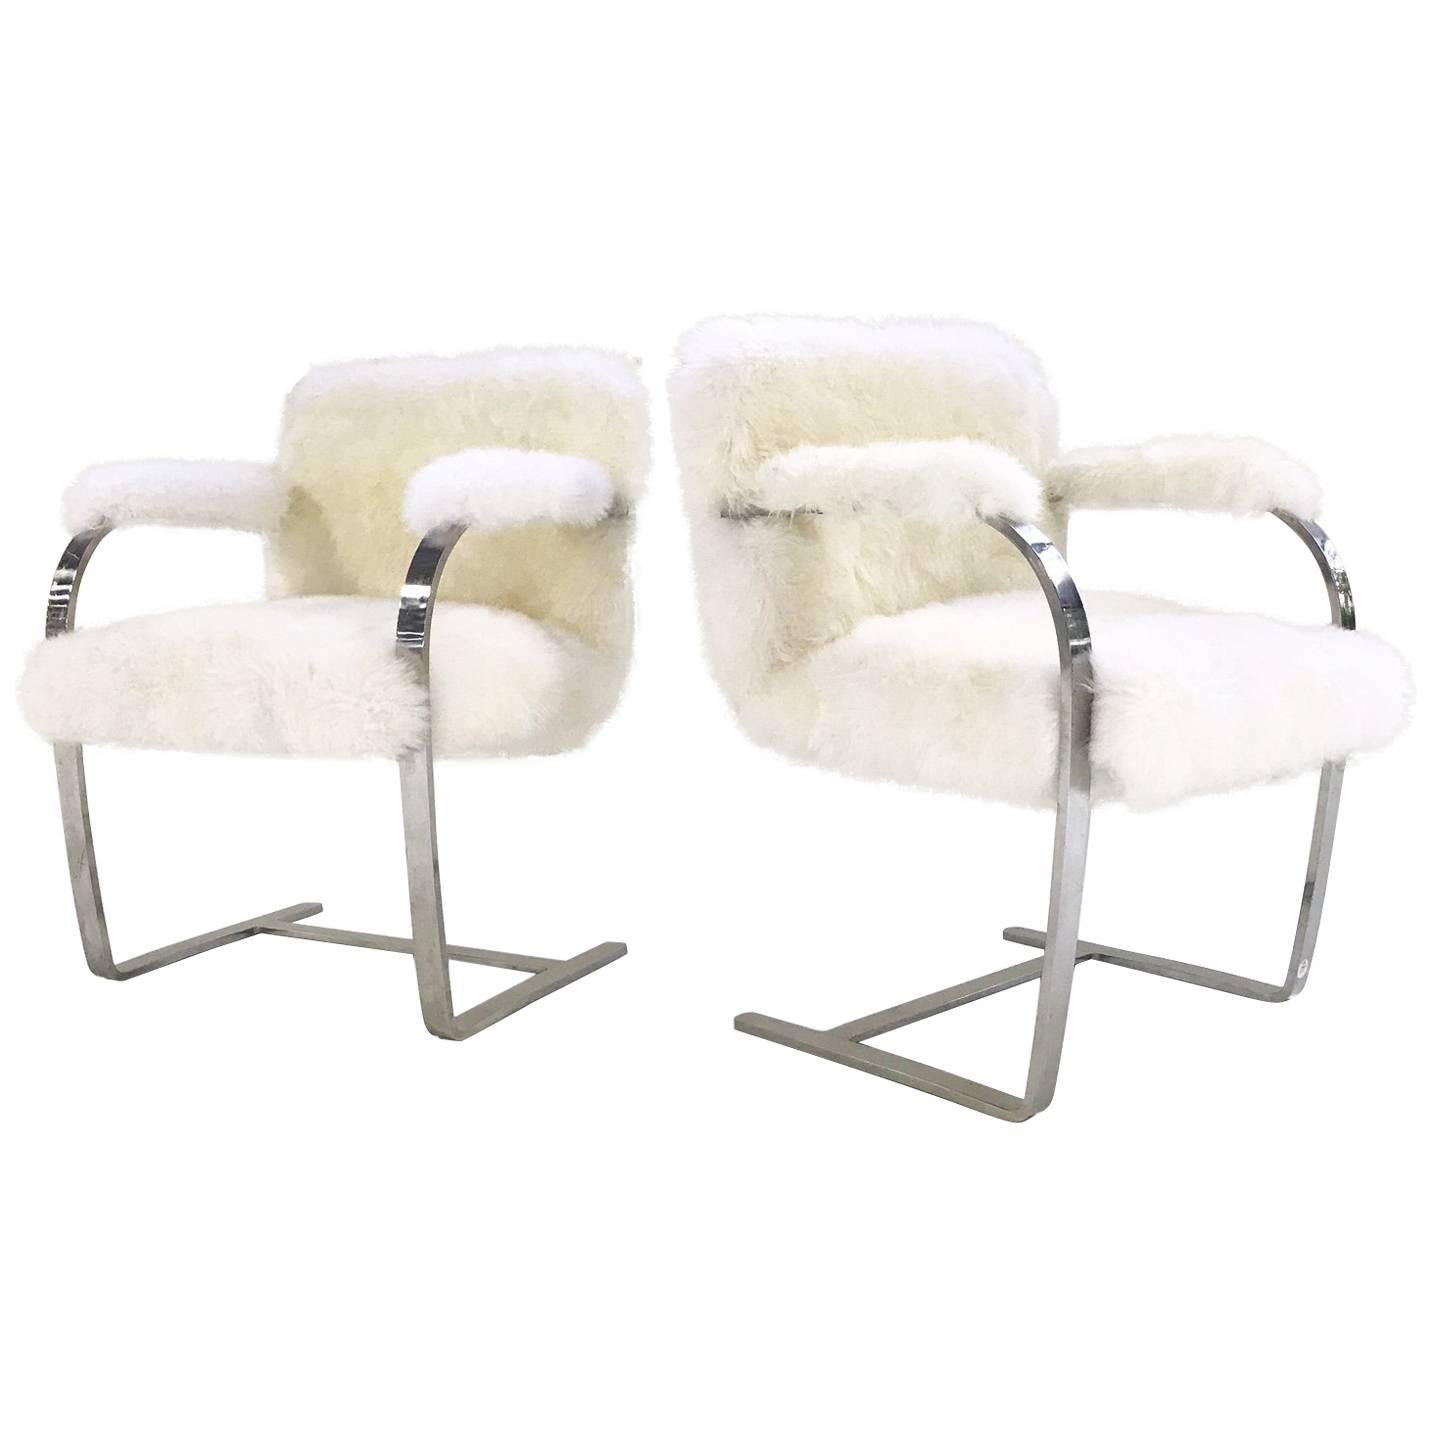 Mies Van Der Rohe Brno Chairs for Knoll in New Zealand Sheepskin - Pair